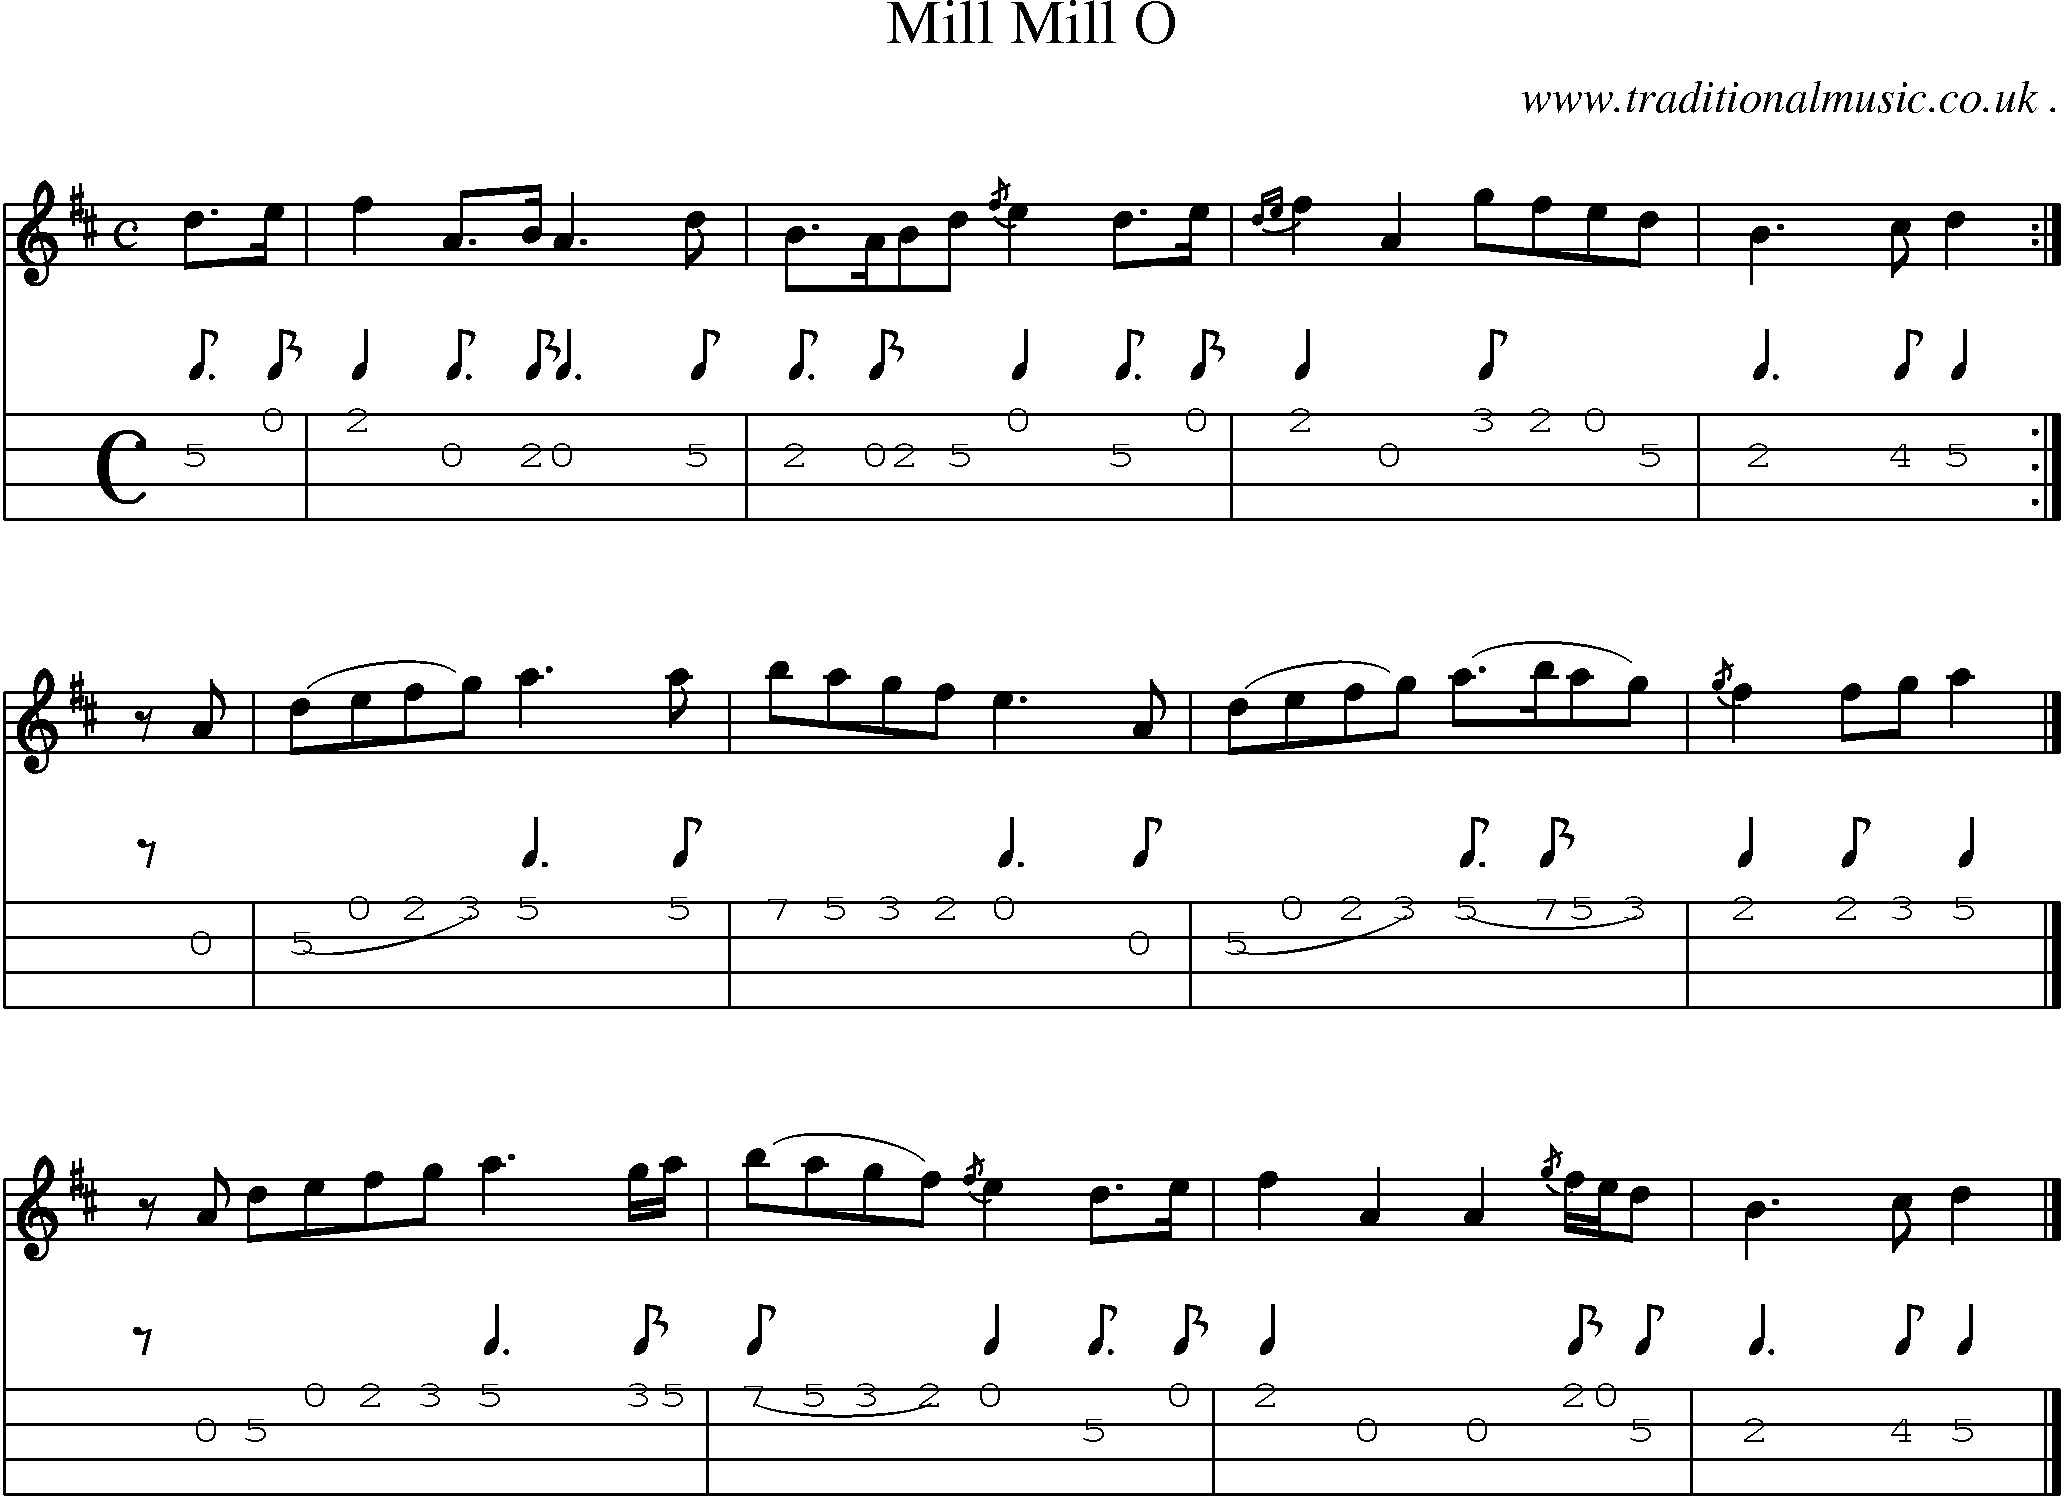 Sheet-music  score, Chords and Mandolin Tabs for Mill Mill O